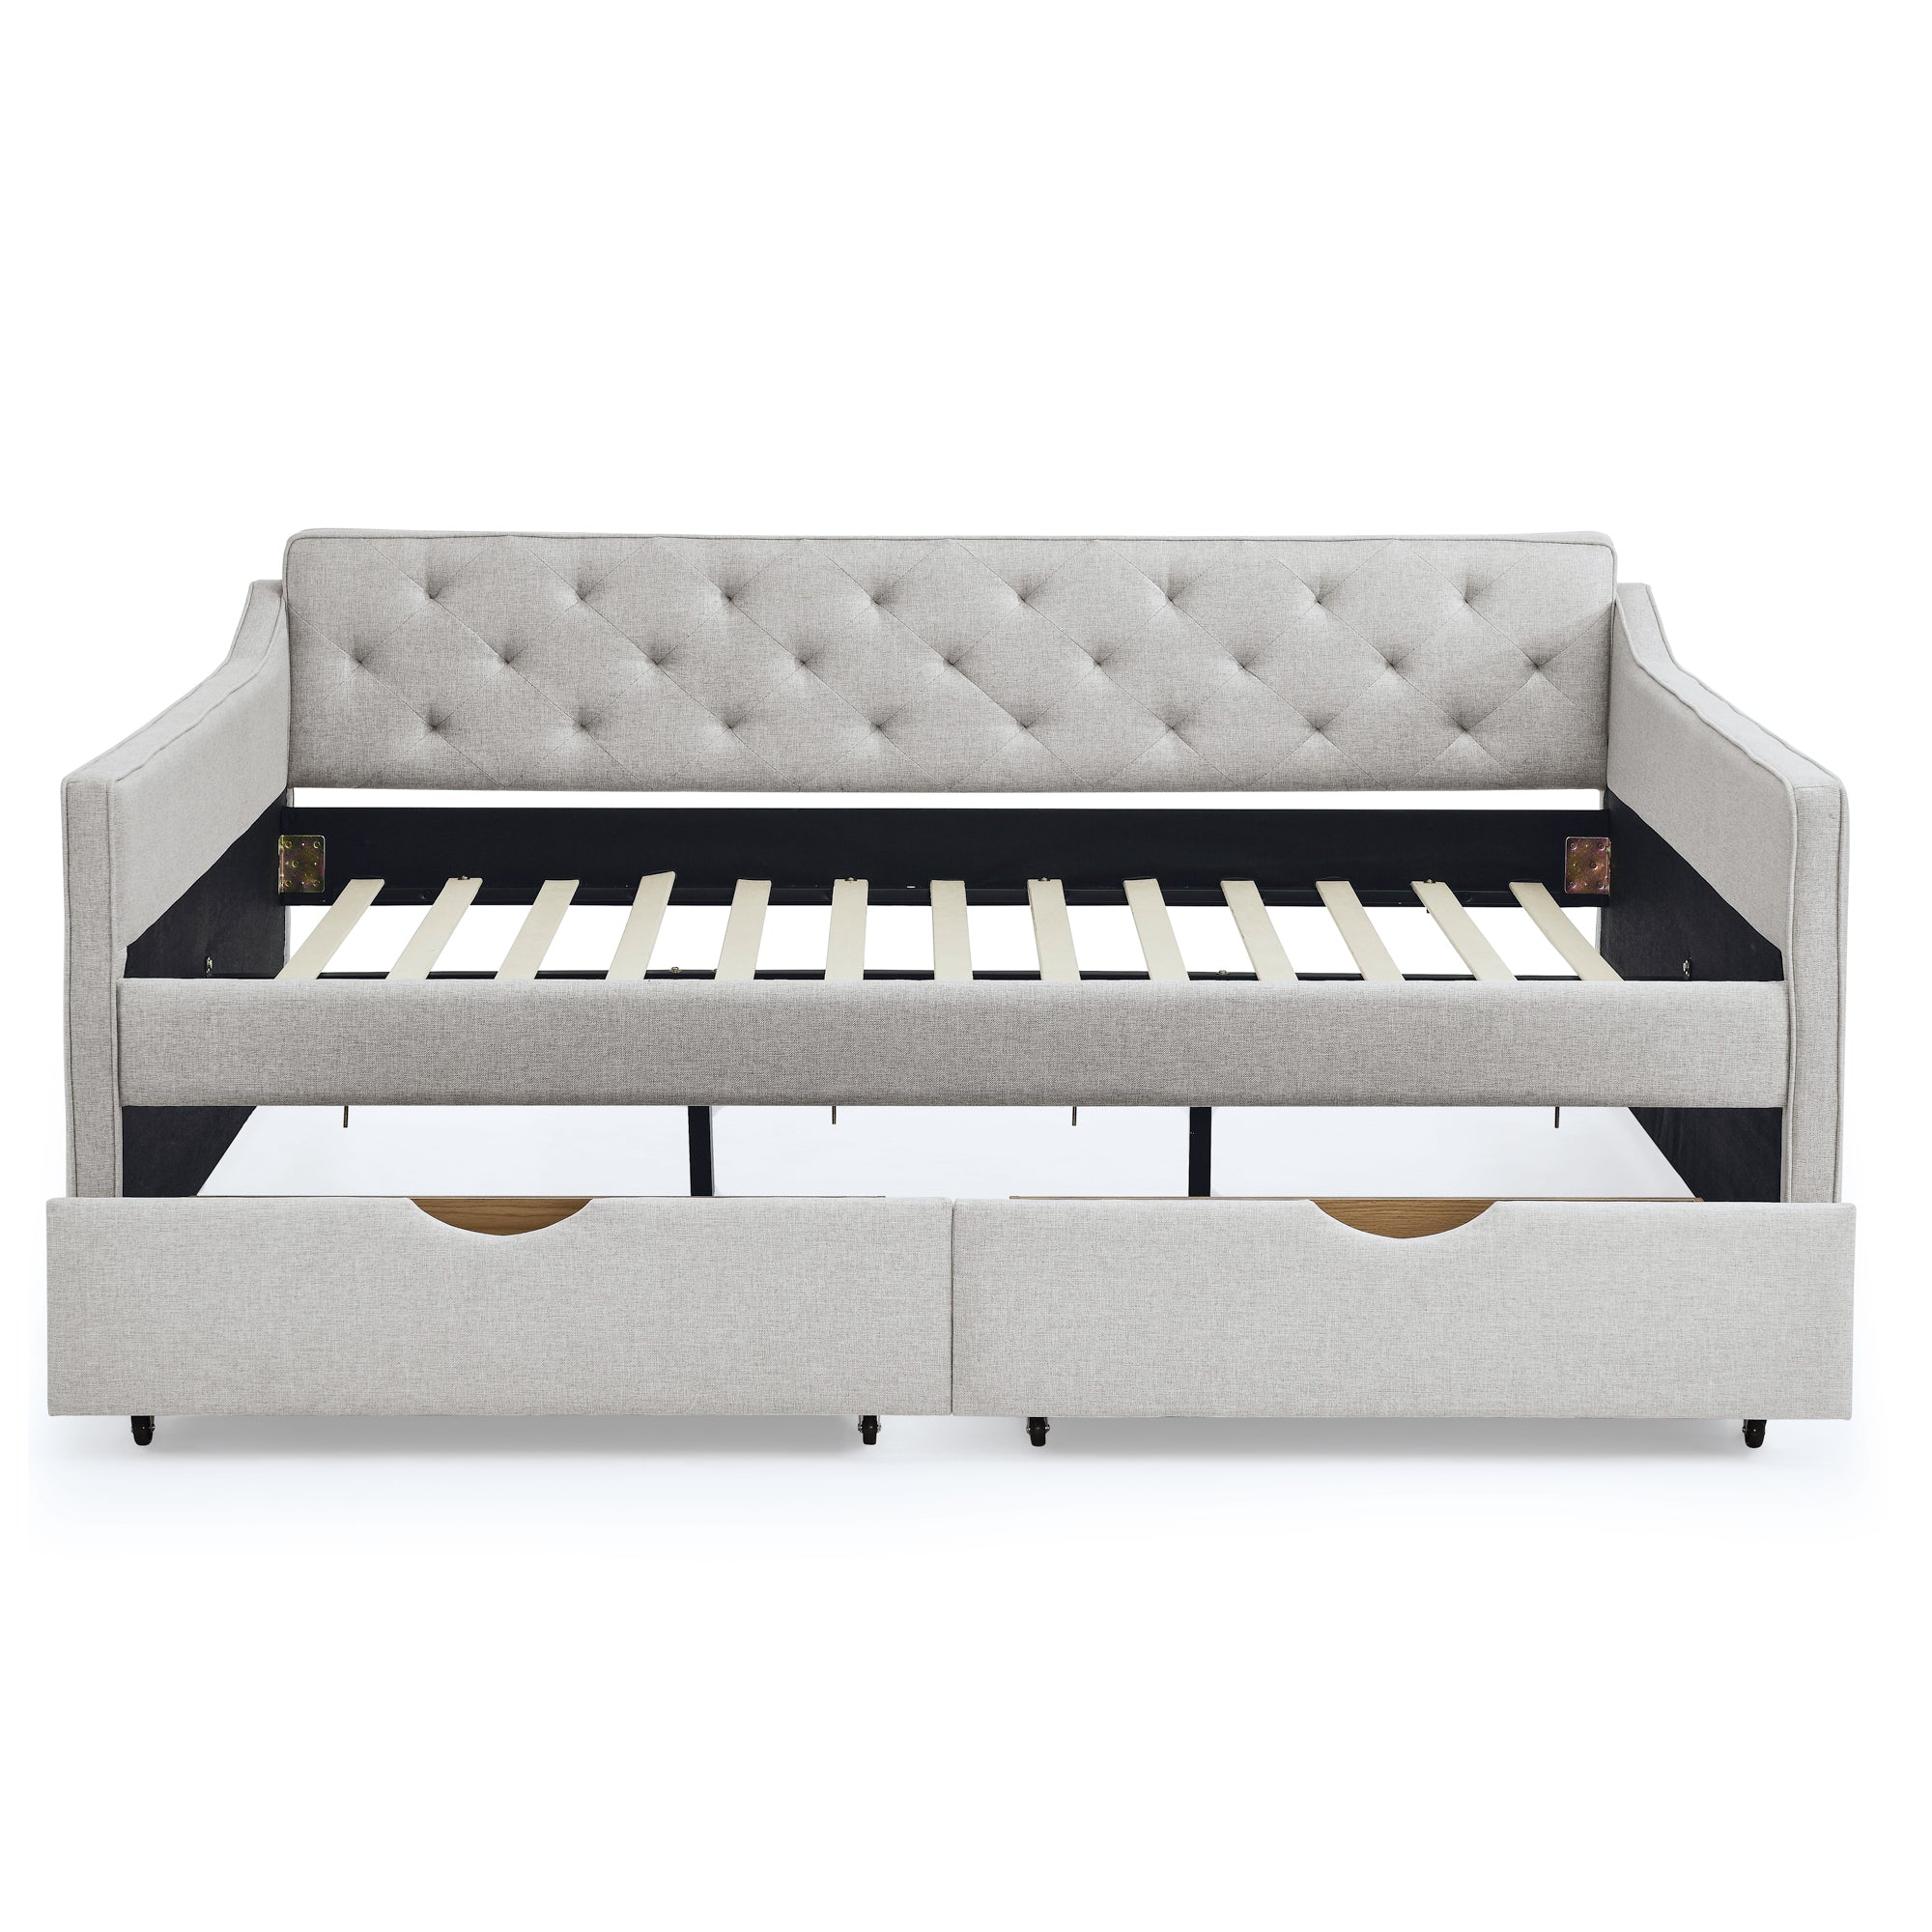 Queen Size Daybed with Drawers Upholstered Tufted Sofa box spring not